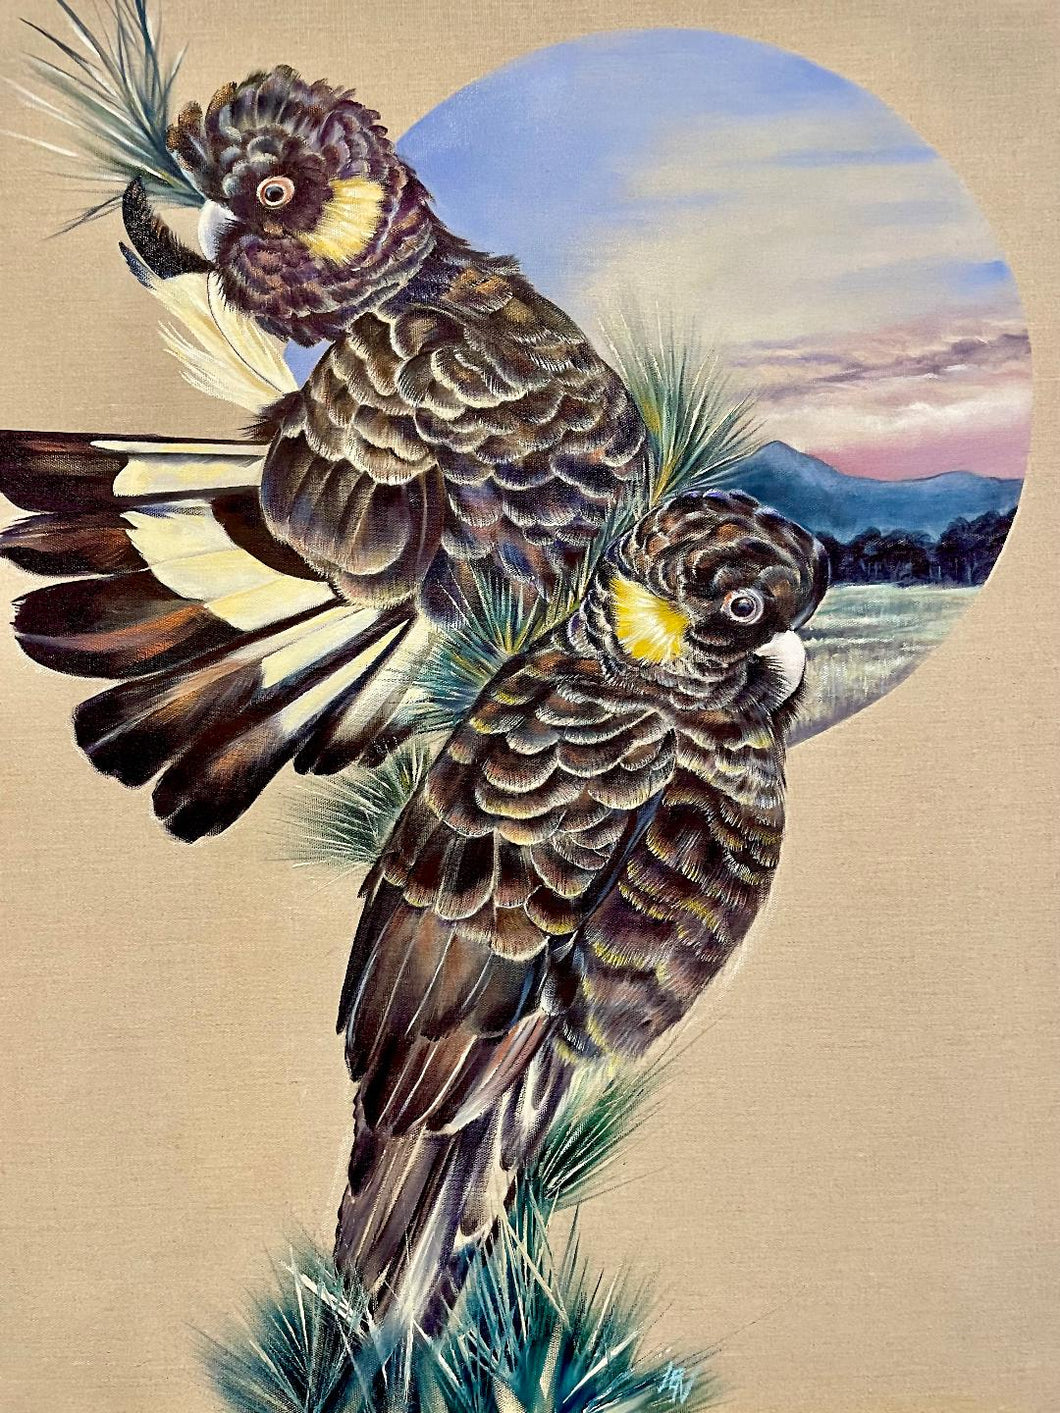 A Crackle of Yellow Tailed Cockatoos - Original Oil Painting